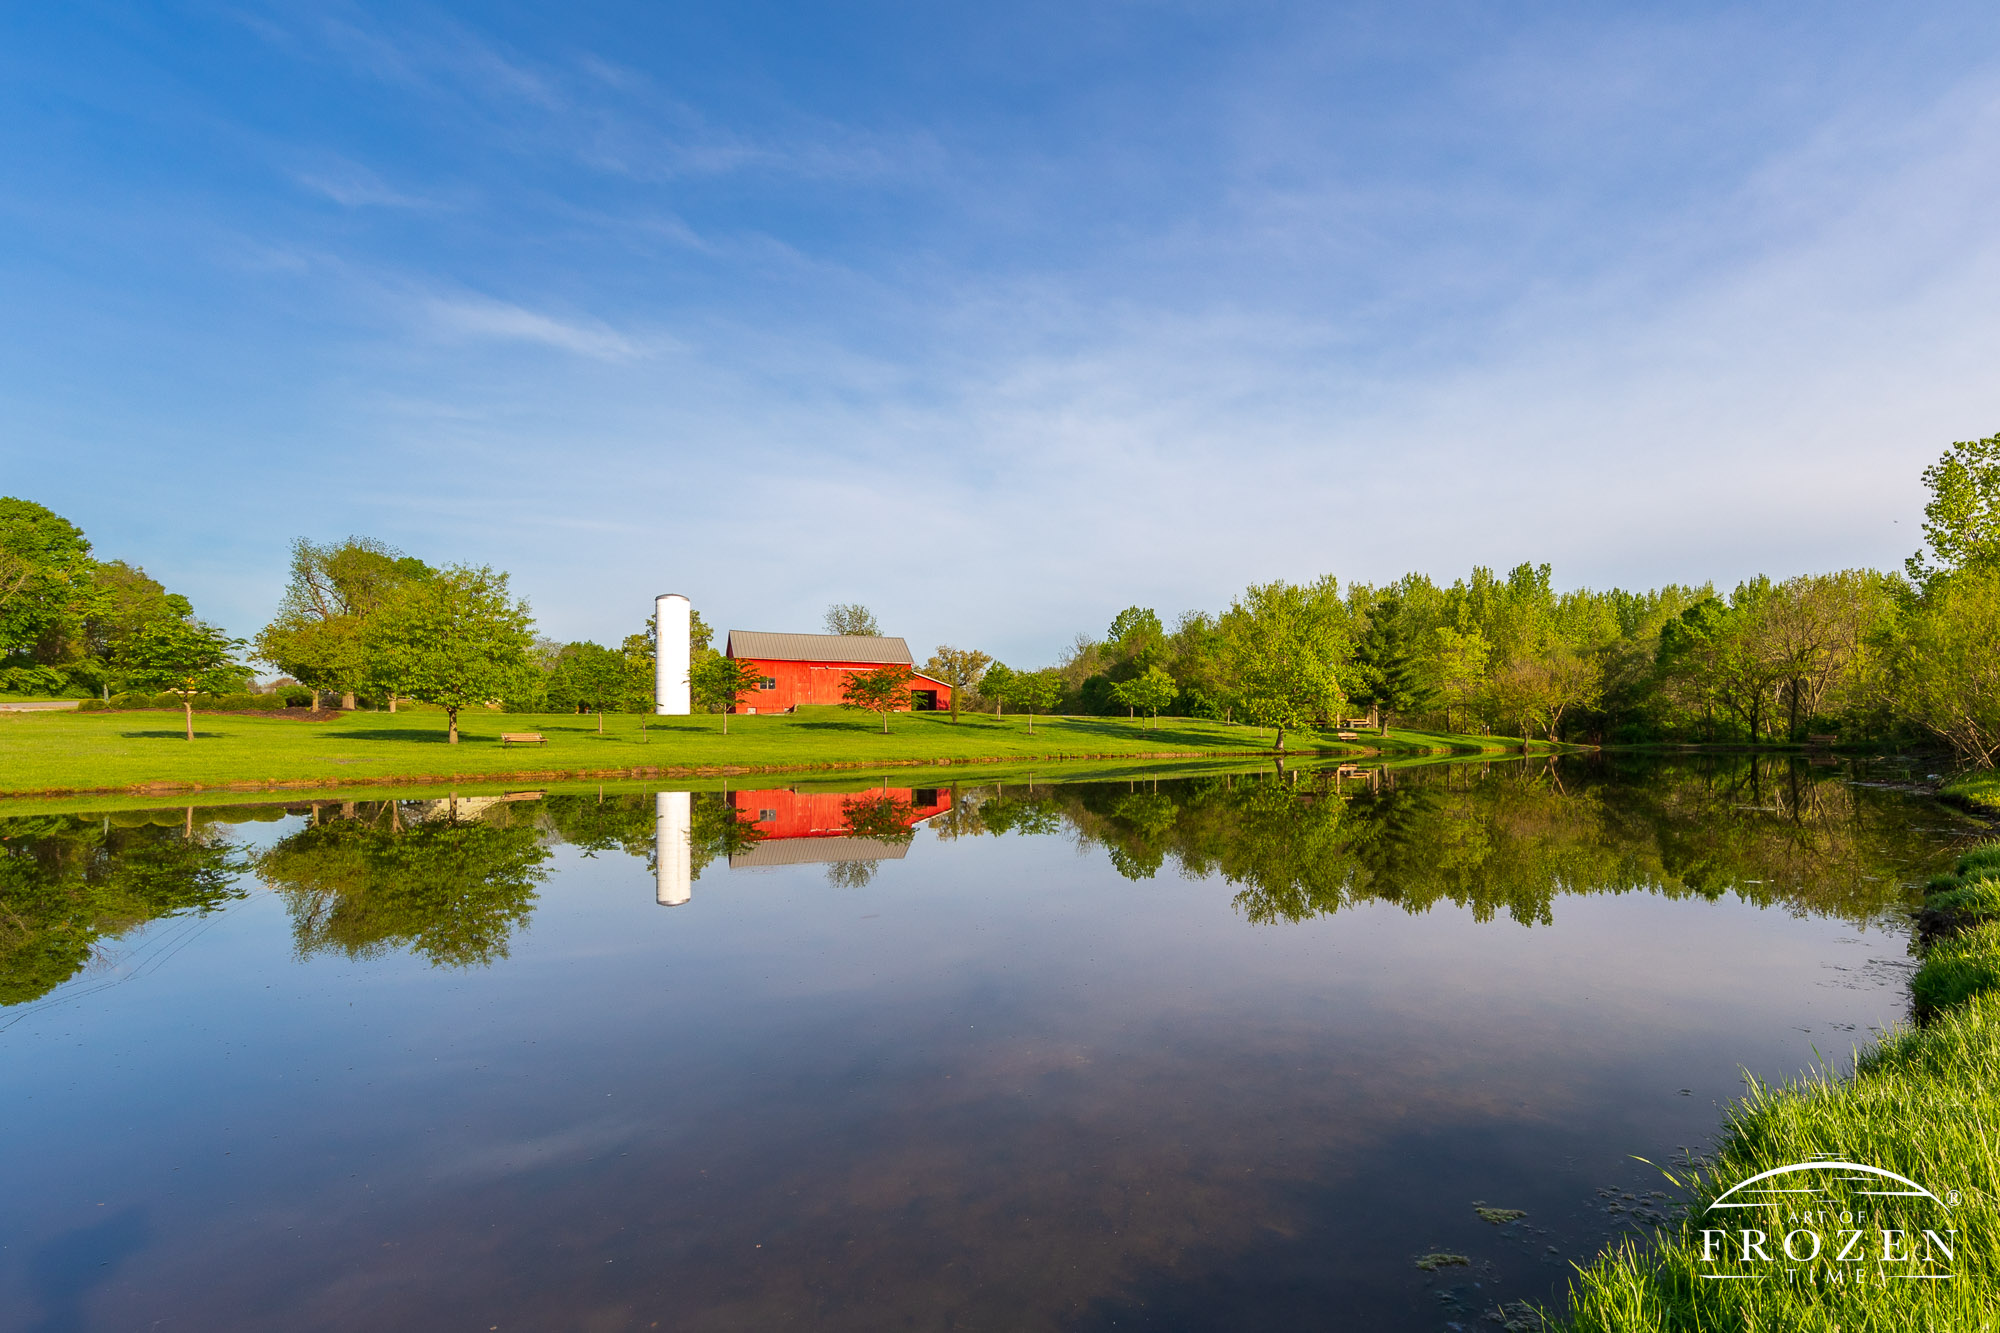 A traditional Ohio barn with metal roof, red paint and white silo next to a pond whose still waters form a perfect reflection